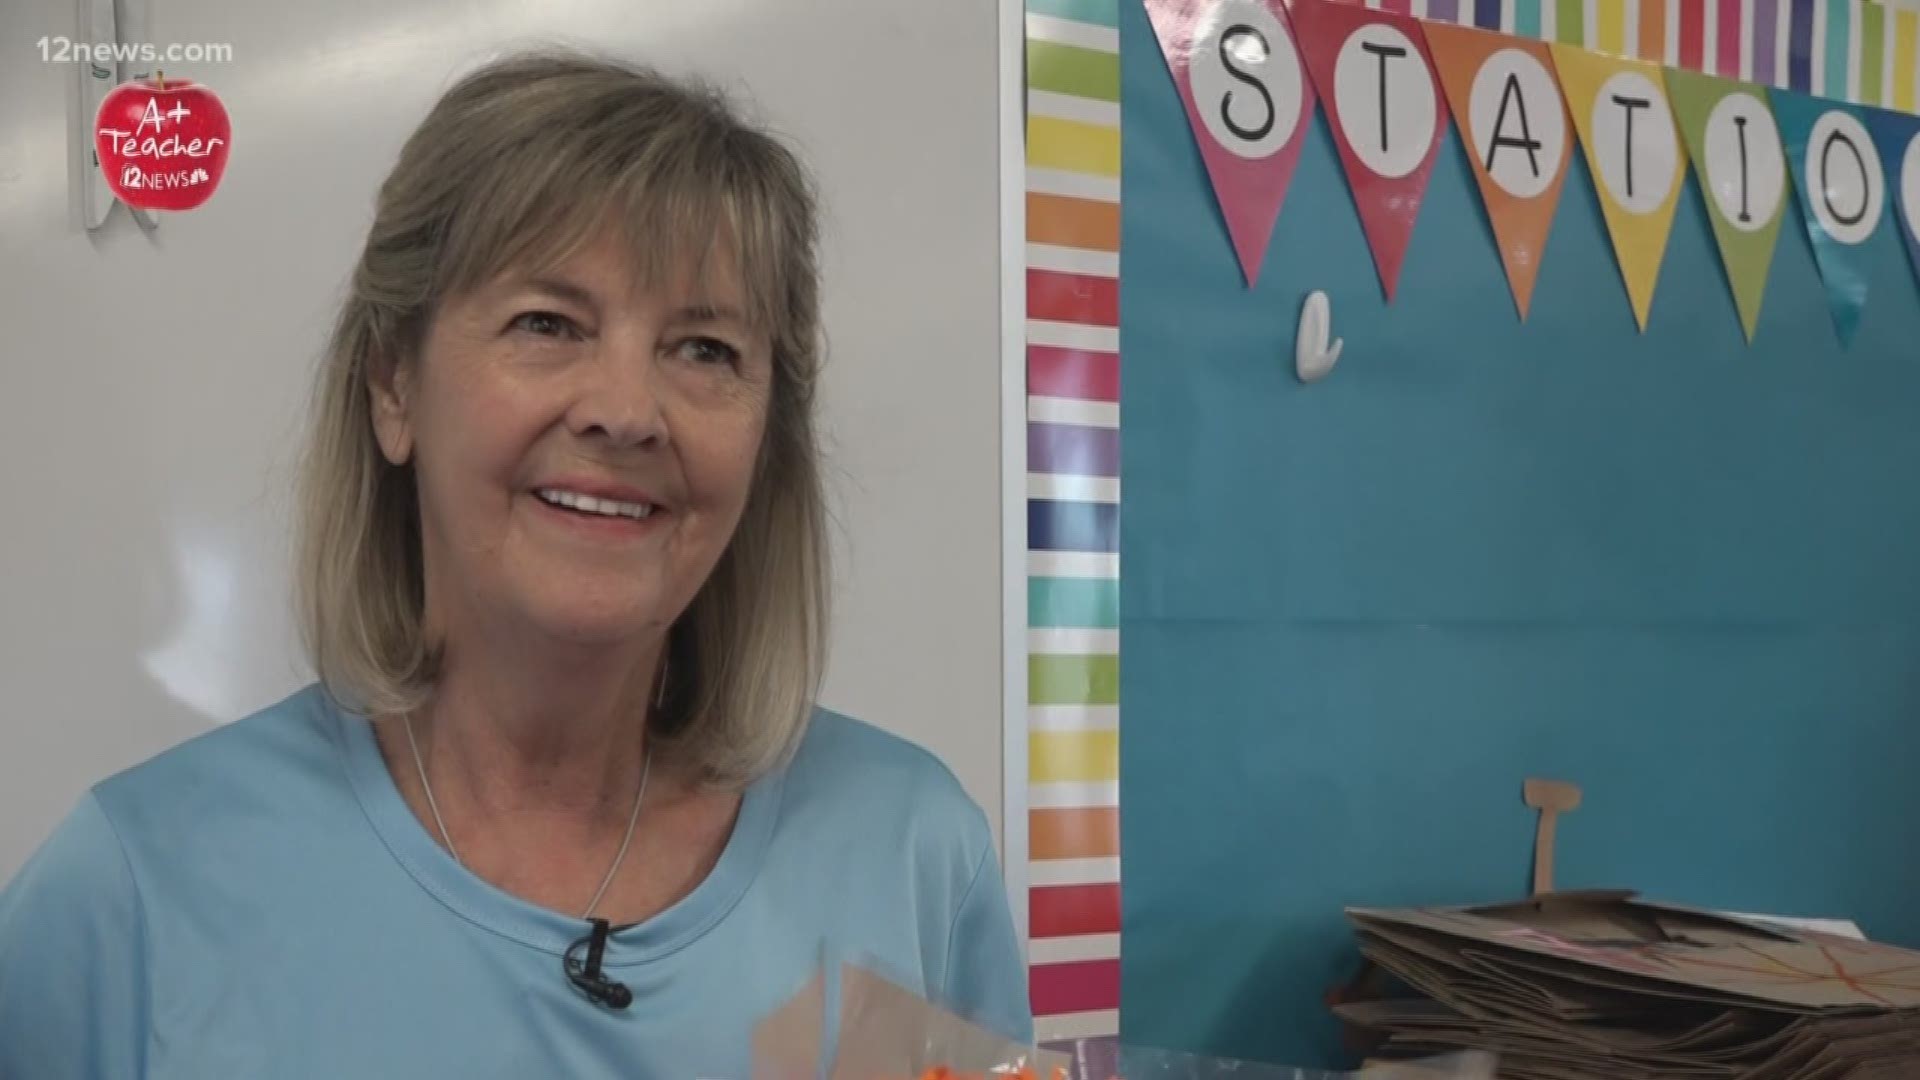 This week's A+ teacher is Patricia Grant from Scottsdale. Trisha Hendricks shares her story.